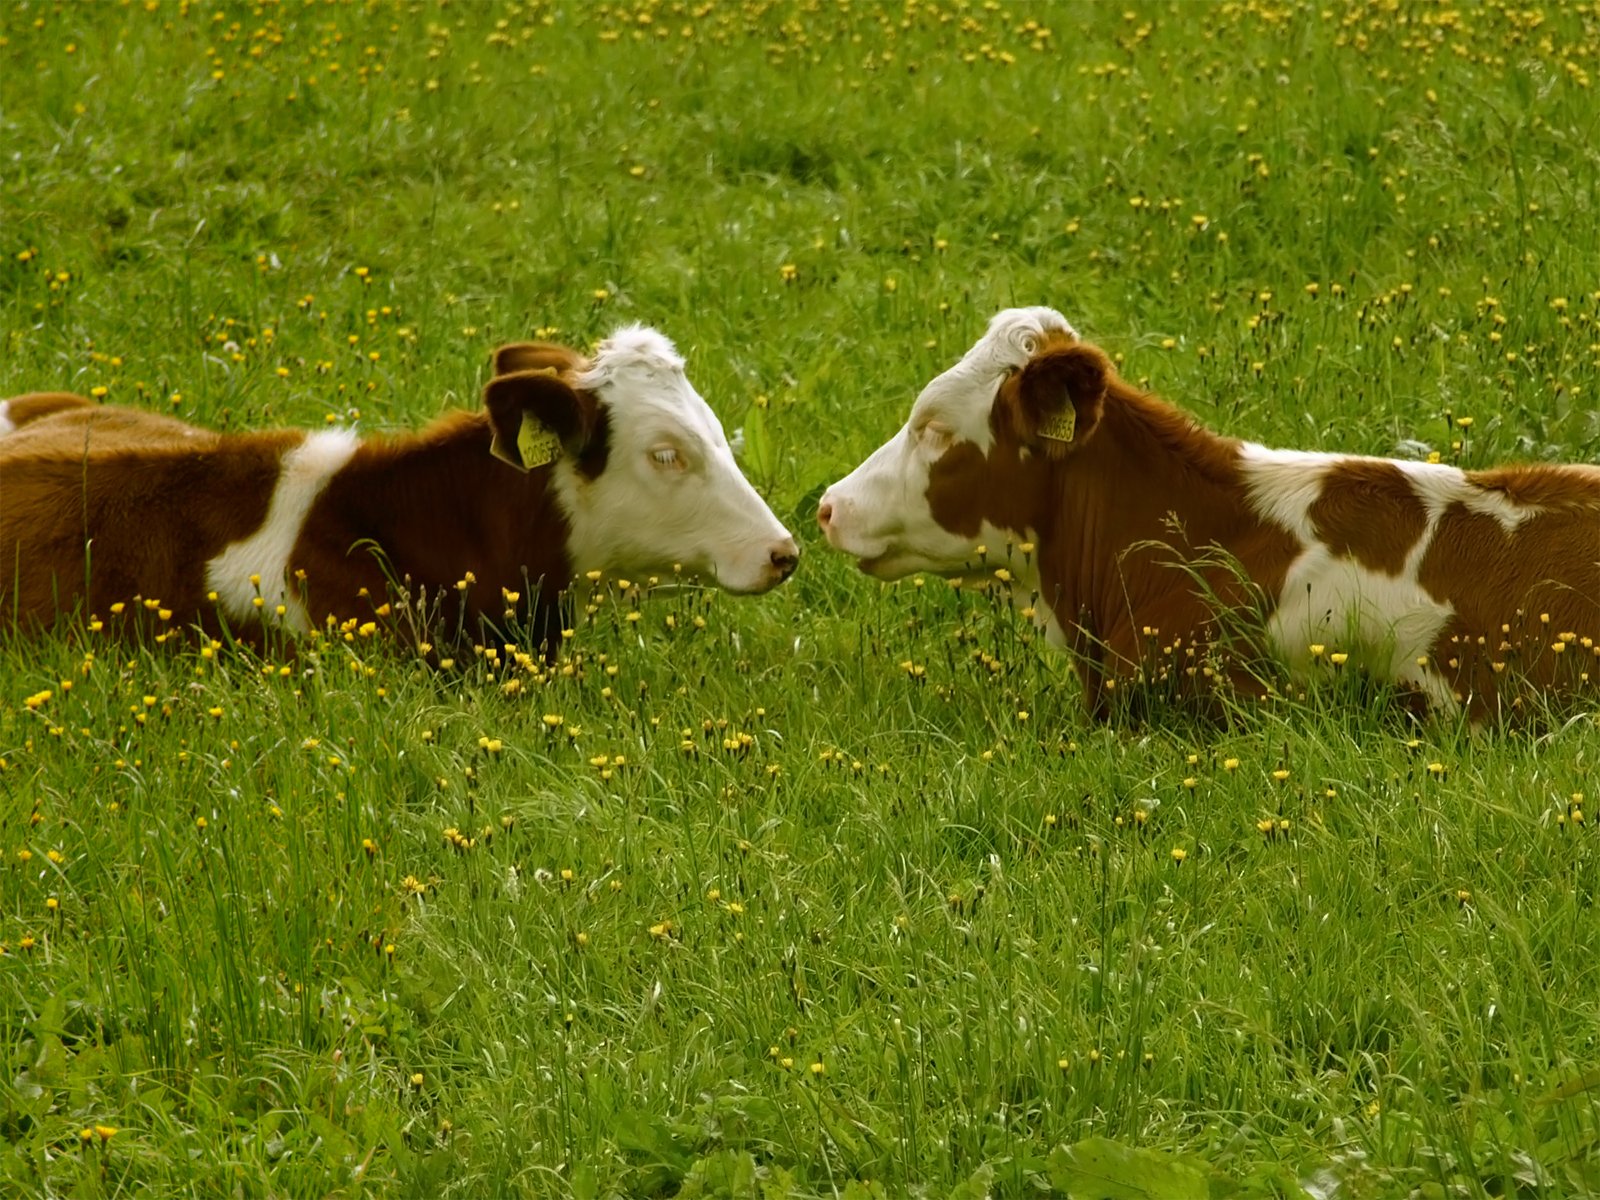 two brown and white cows lying in a grassy field